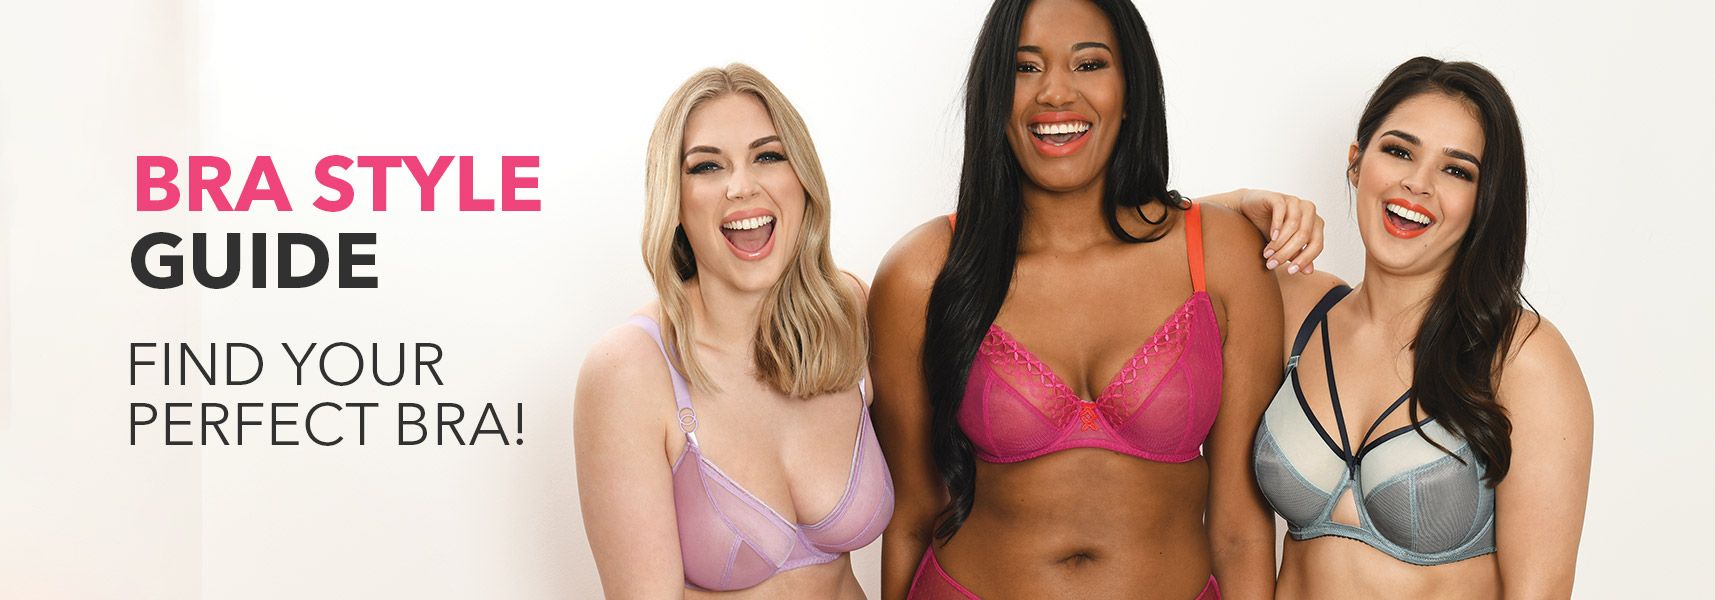 bra style guide banner image